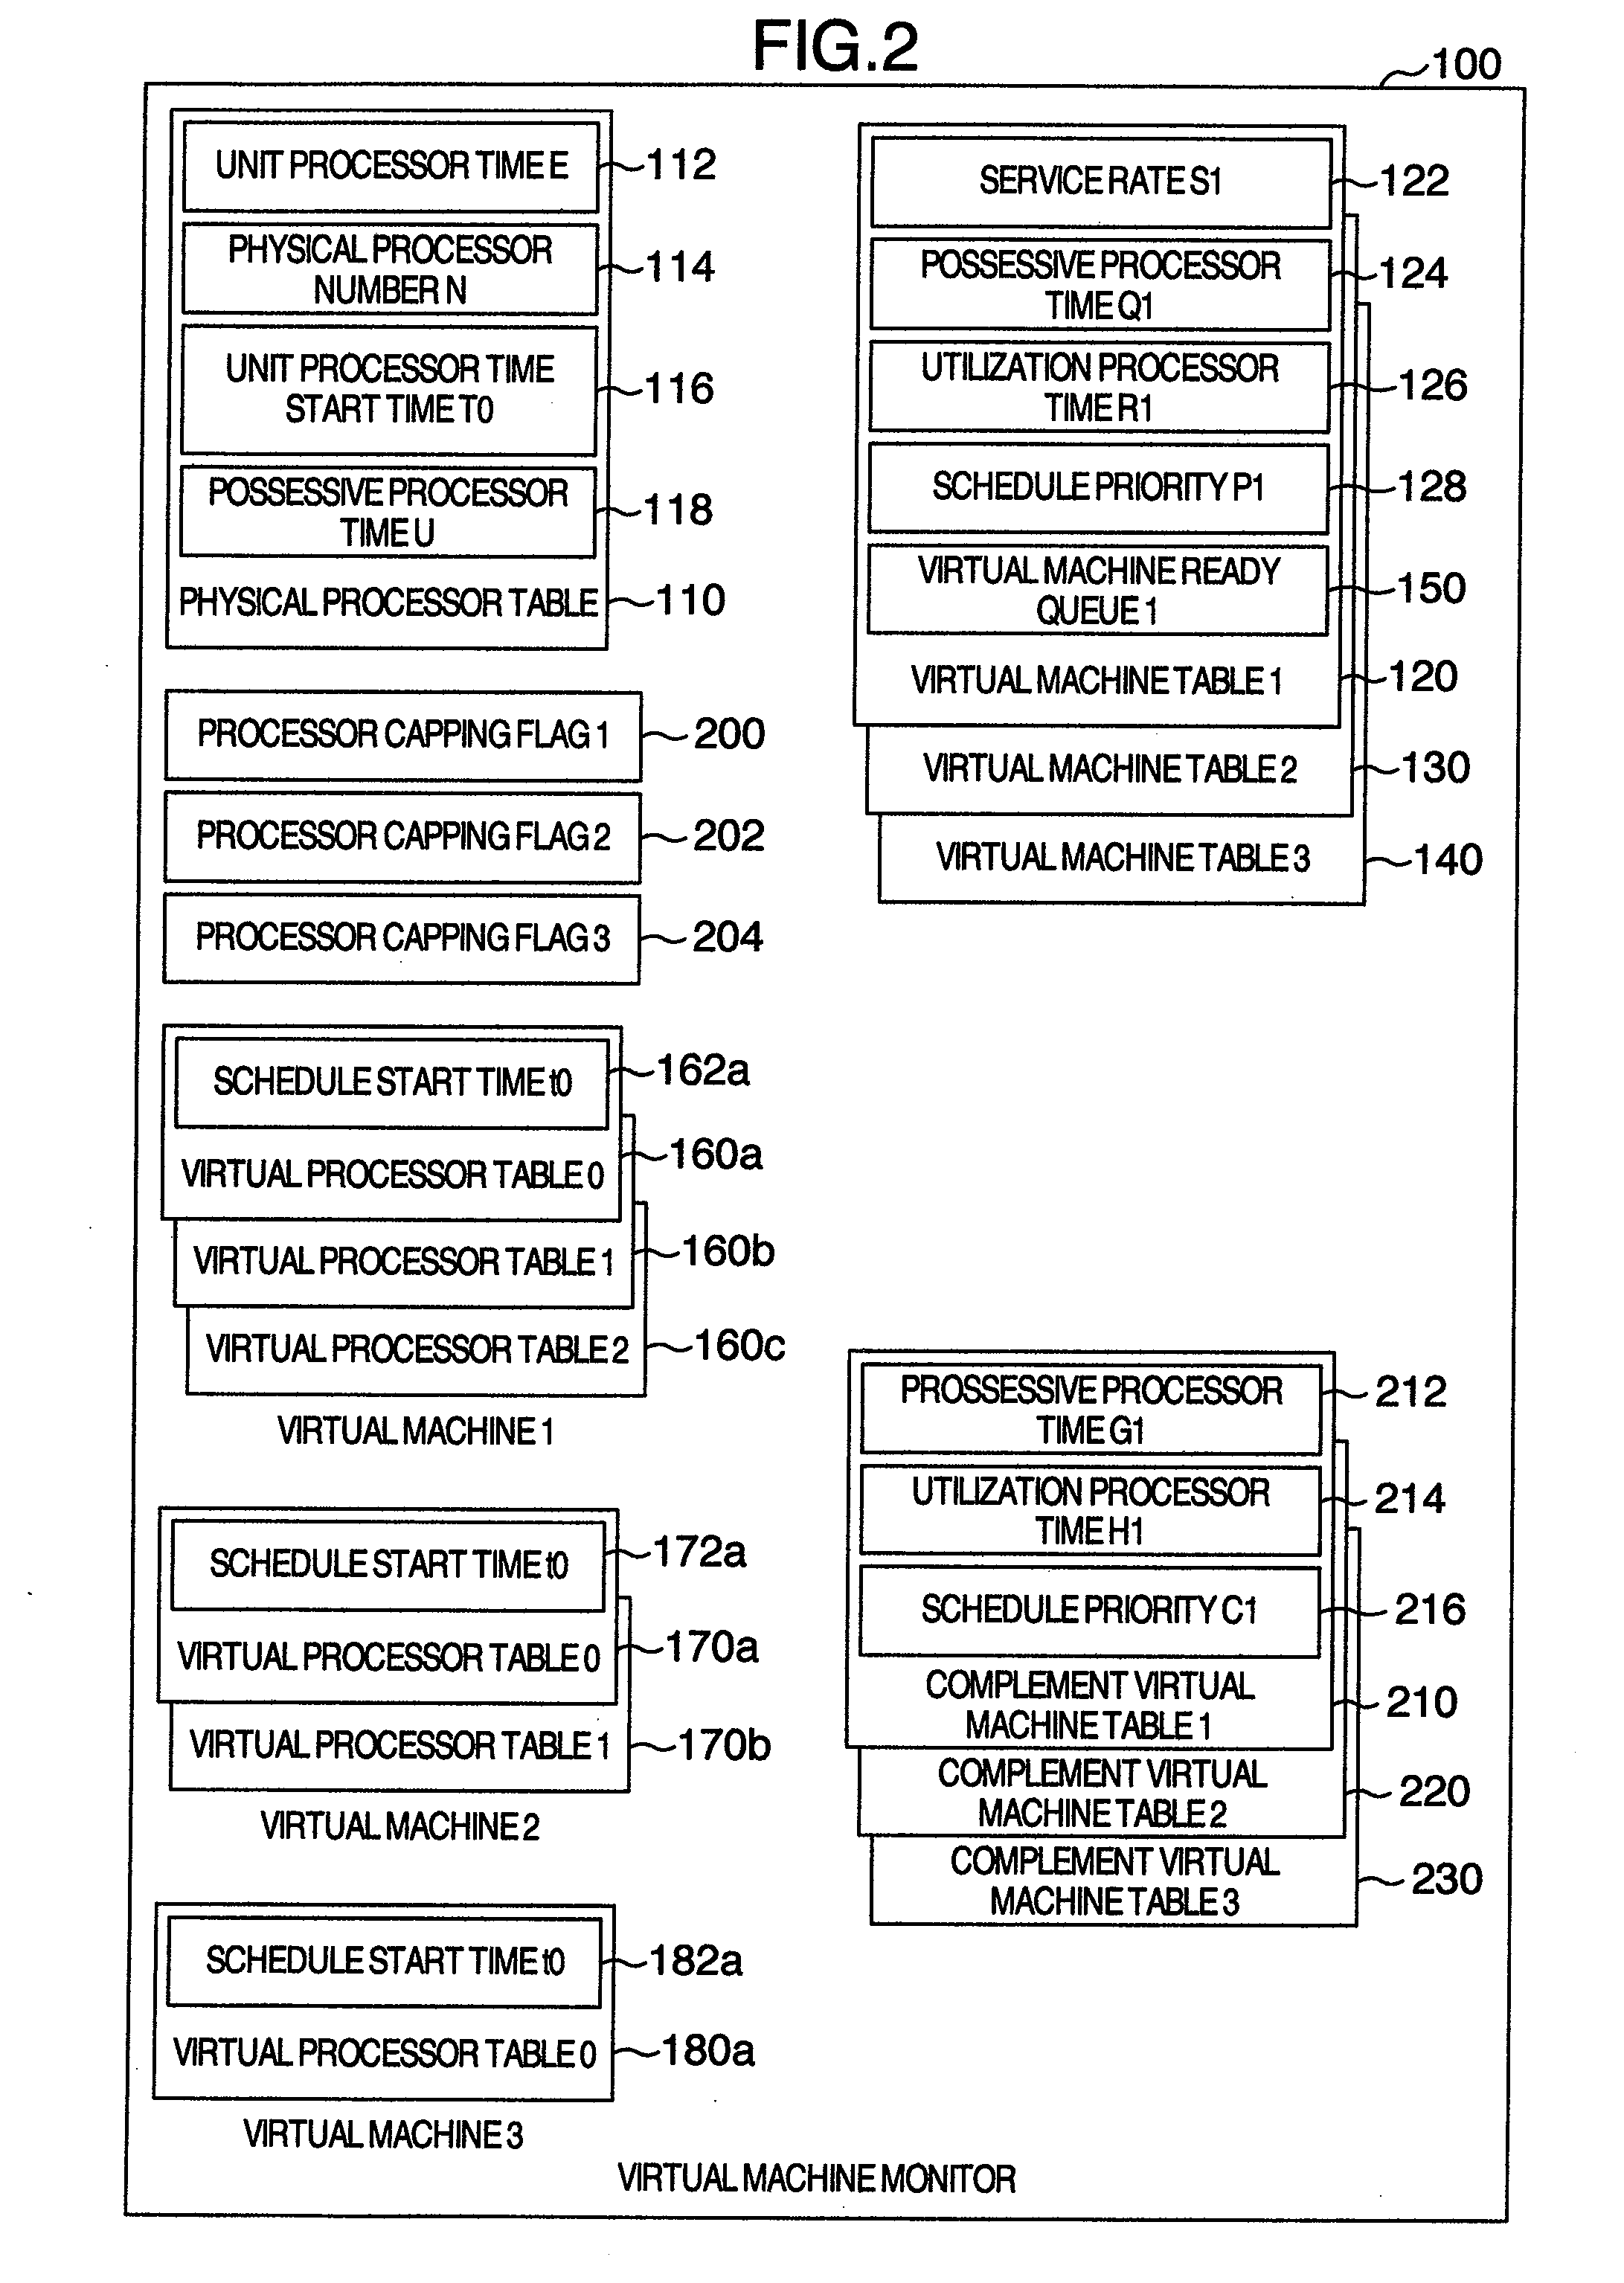 Processor capping method in virtual machine system